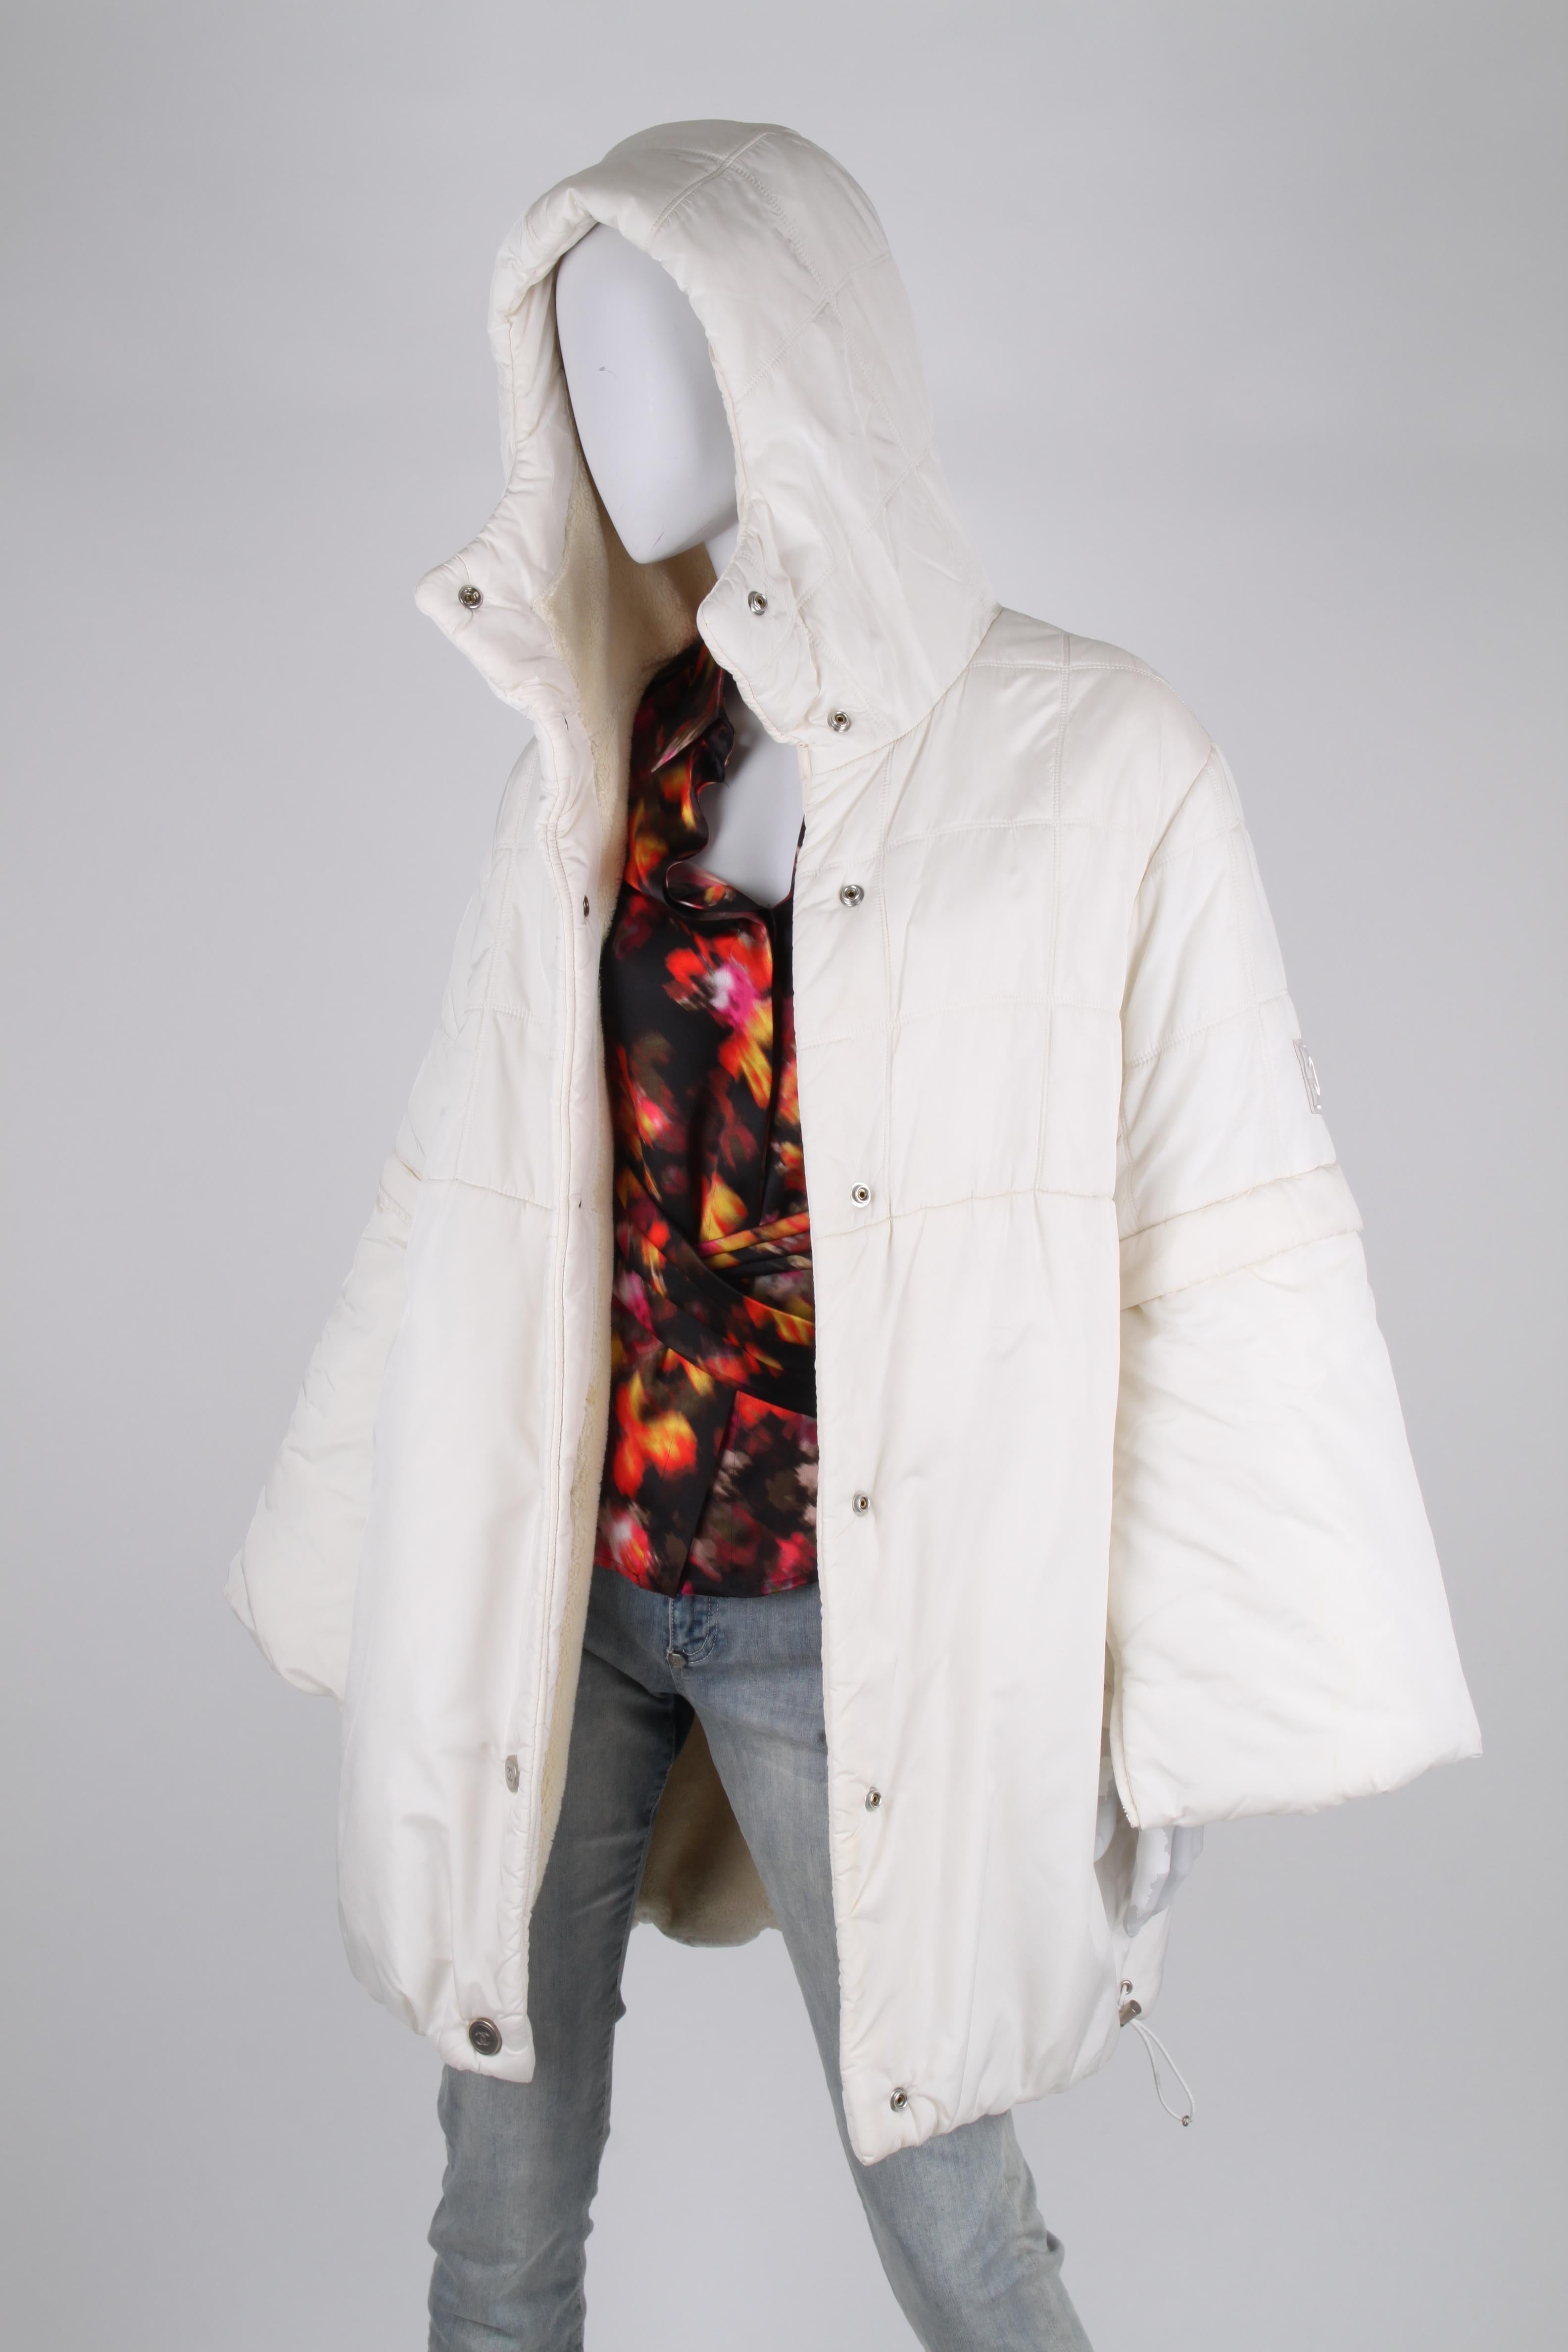 This wonderful white coat is from the Sports Line by Chanel, autumn collection 2000.

Front closure with large matte silver-tone push buttons embellished with the CC logo. Has more than hip length, welt pockets, a hood and extra wide sleeves with a